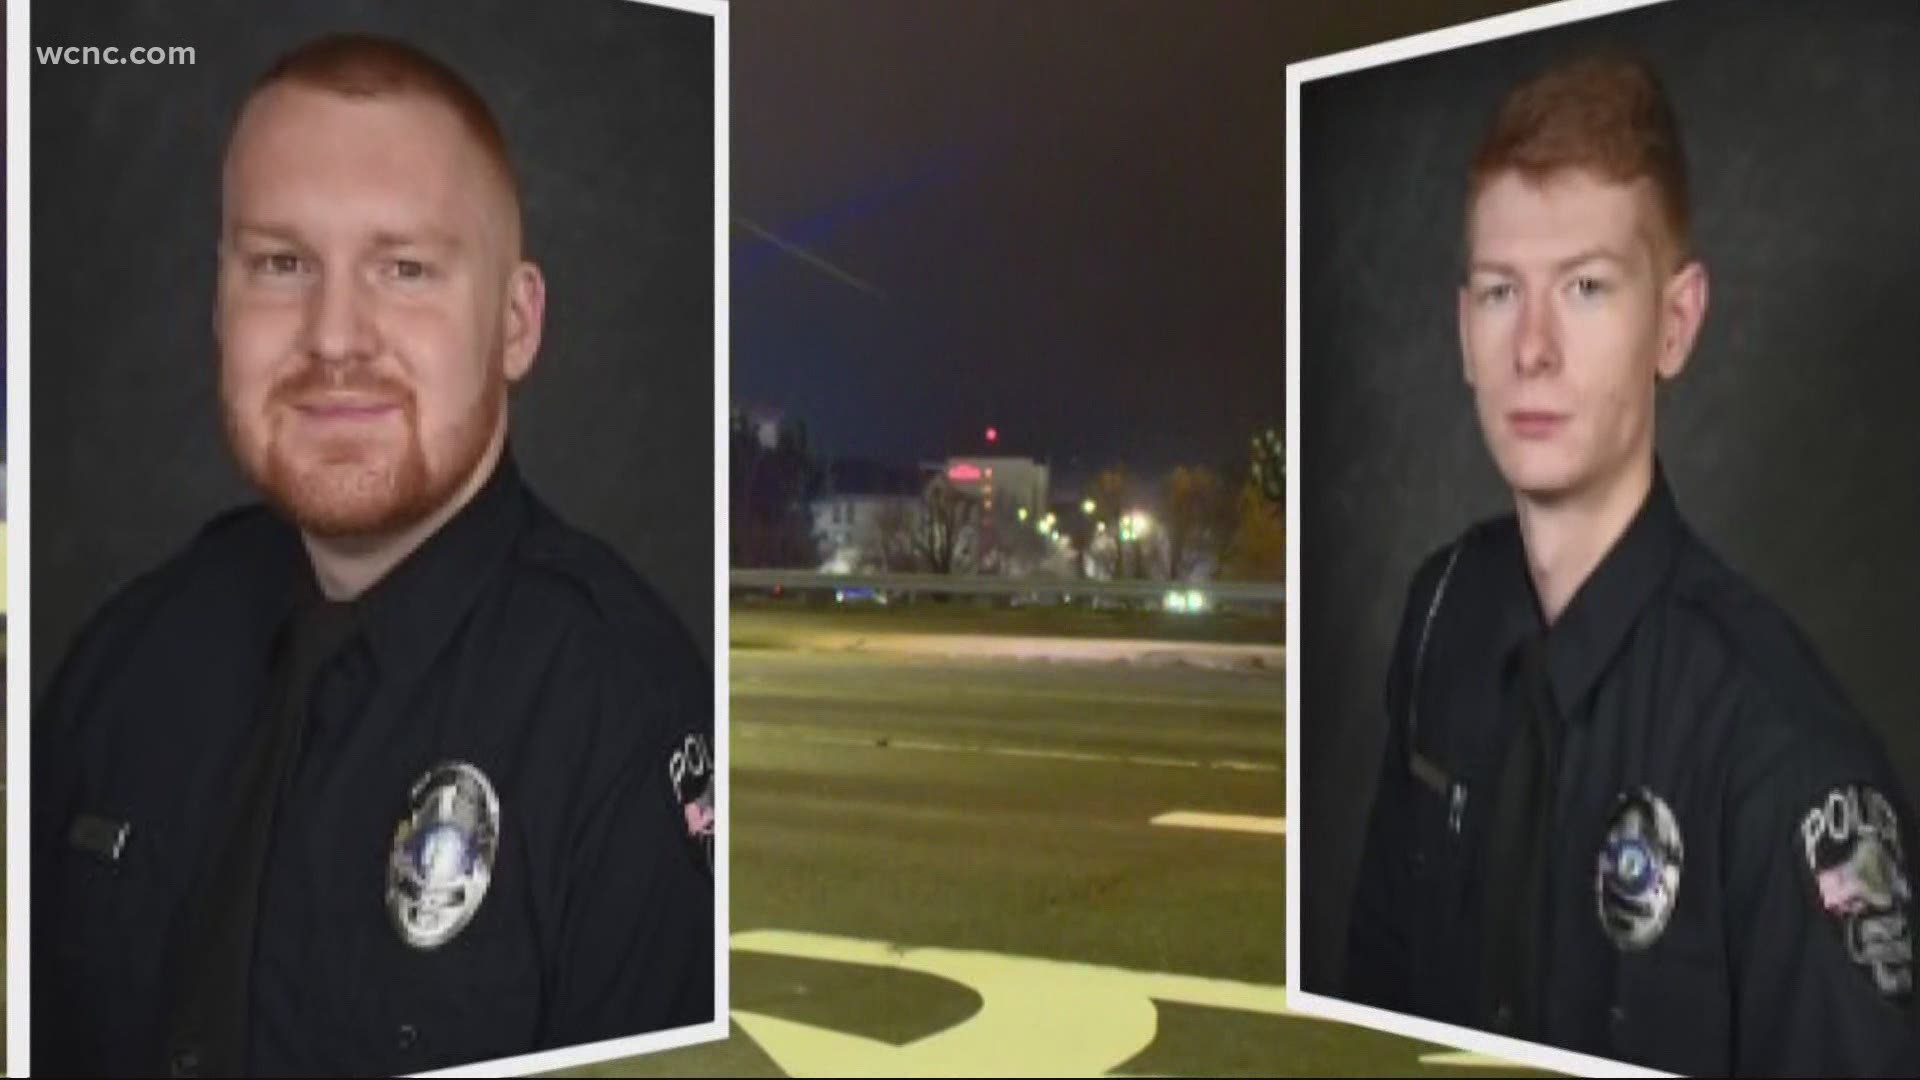 Officer Jason Shuping, 25, was shot and killed Wednesday night in Concord. Police confirmed the suspect also died, and a second officer was injured.